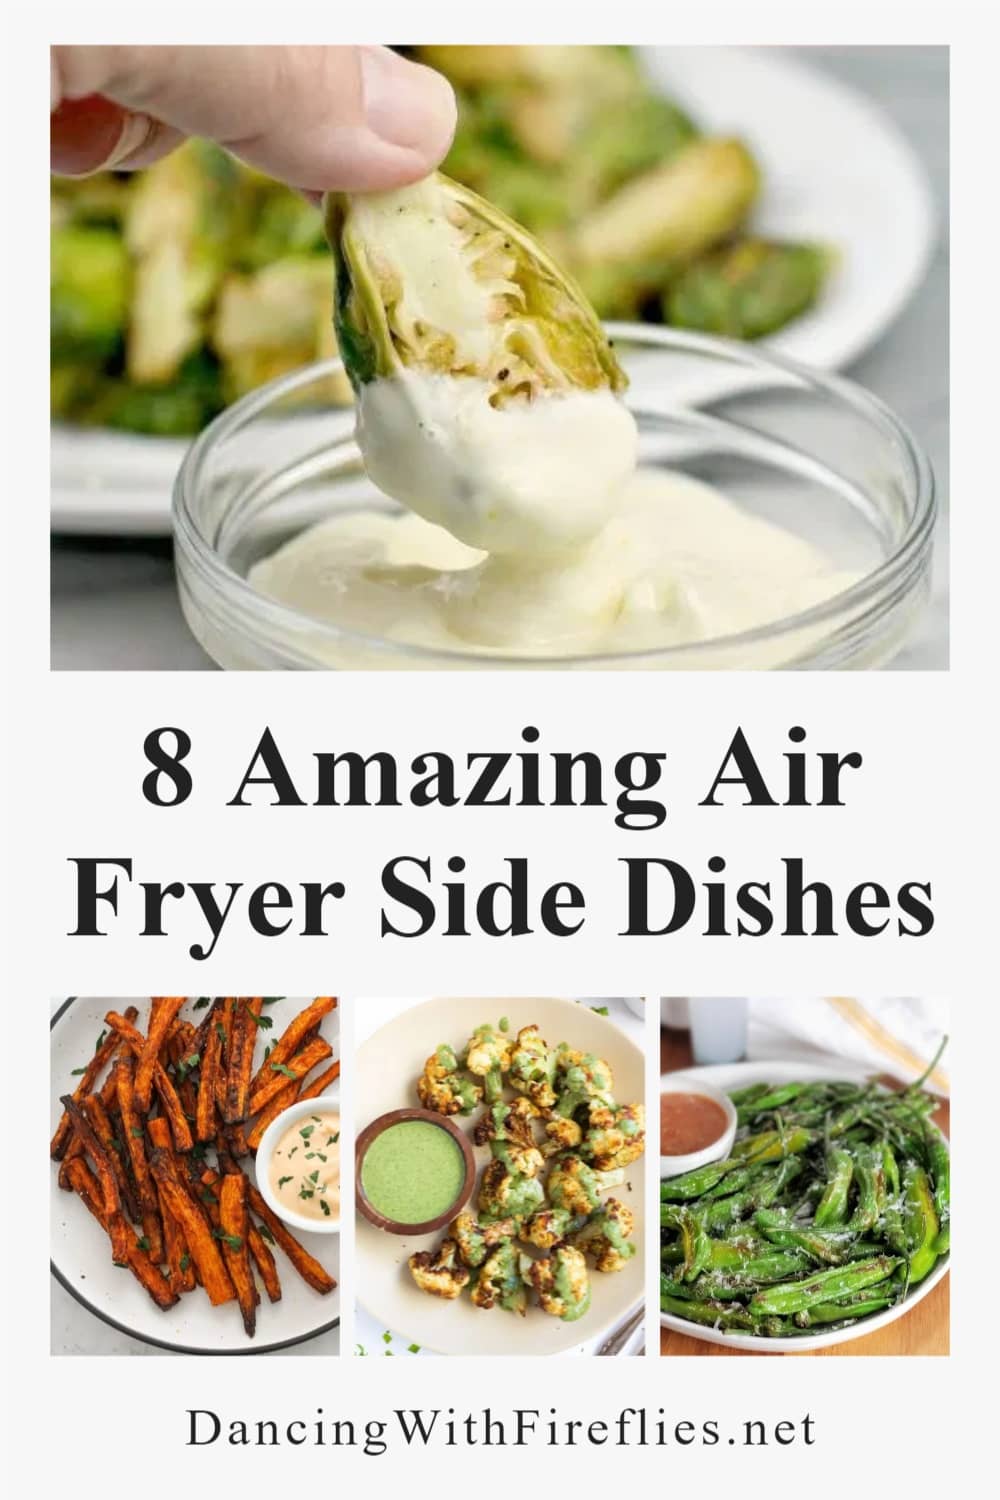 8-Amazing-Air-Fryer-Side-Dishes 1